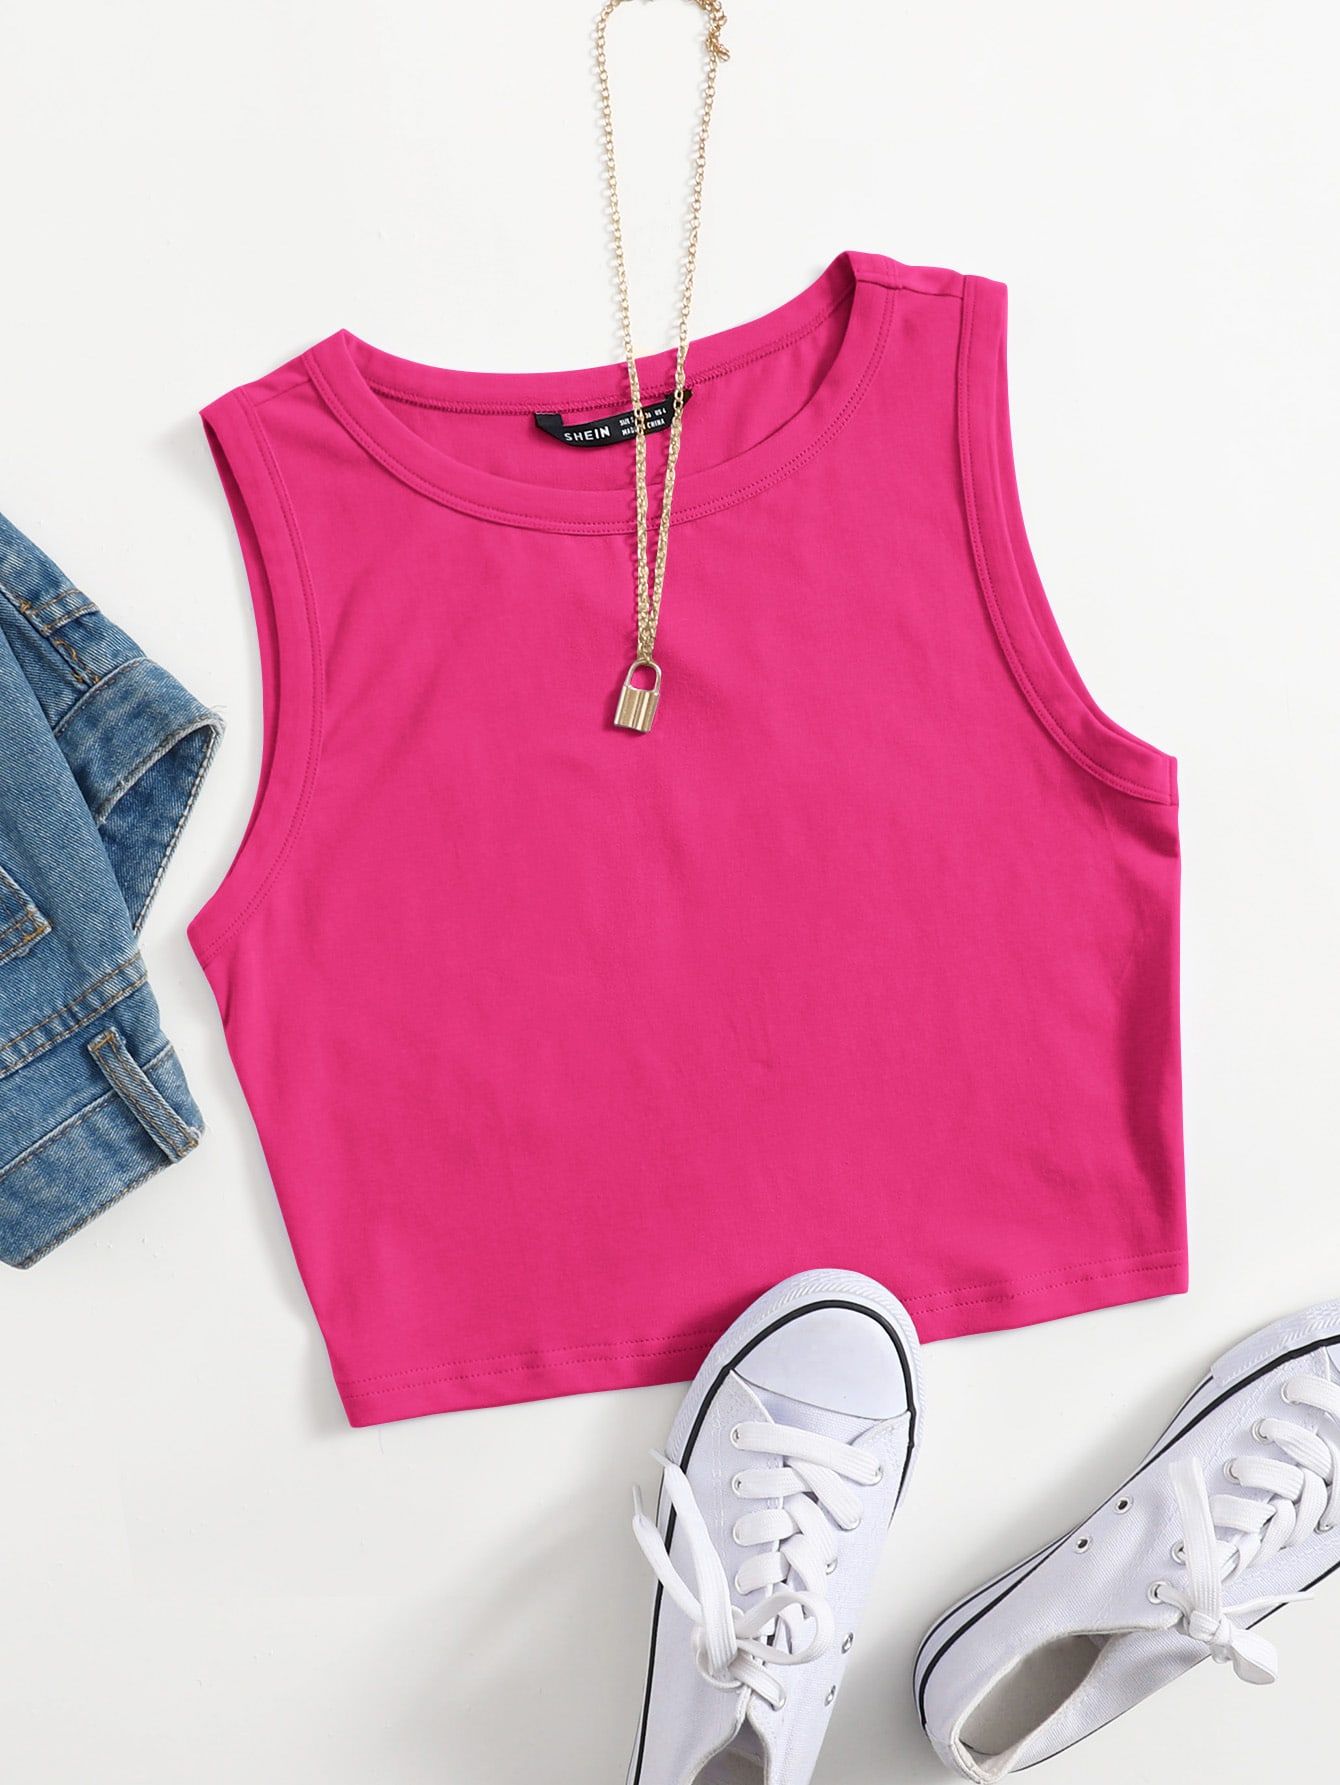 How to Wear Hot Pink Top: Best 13 Ladylike Outfit Ideas for Women